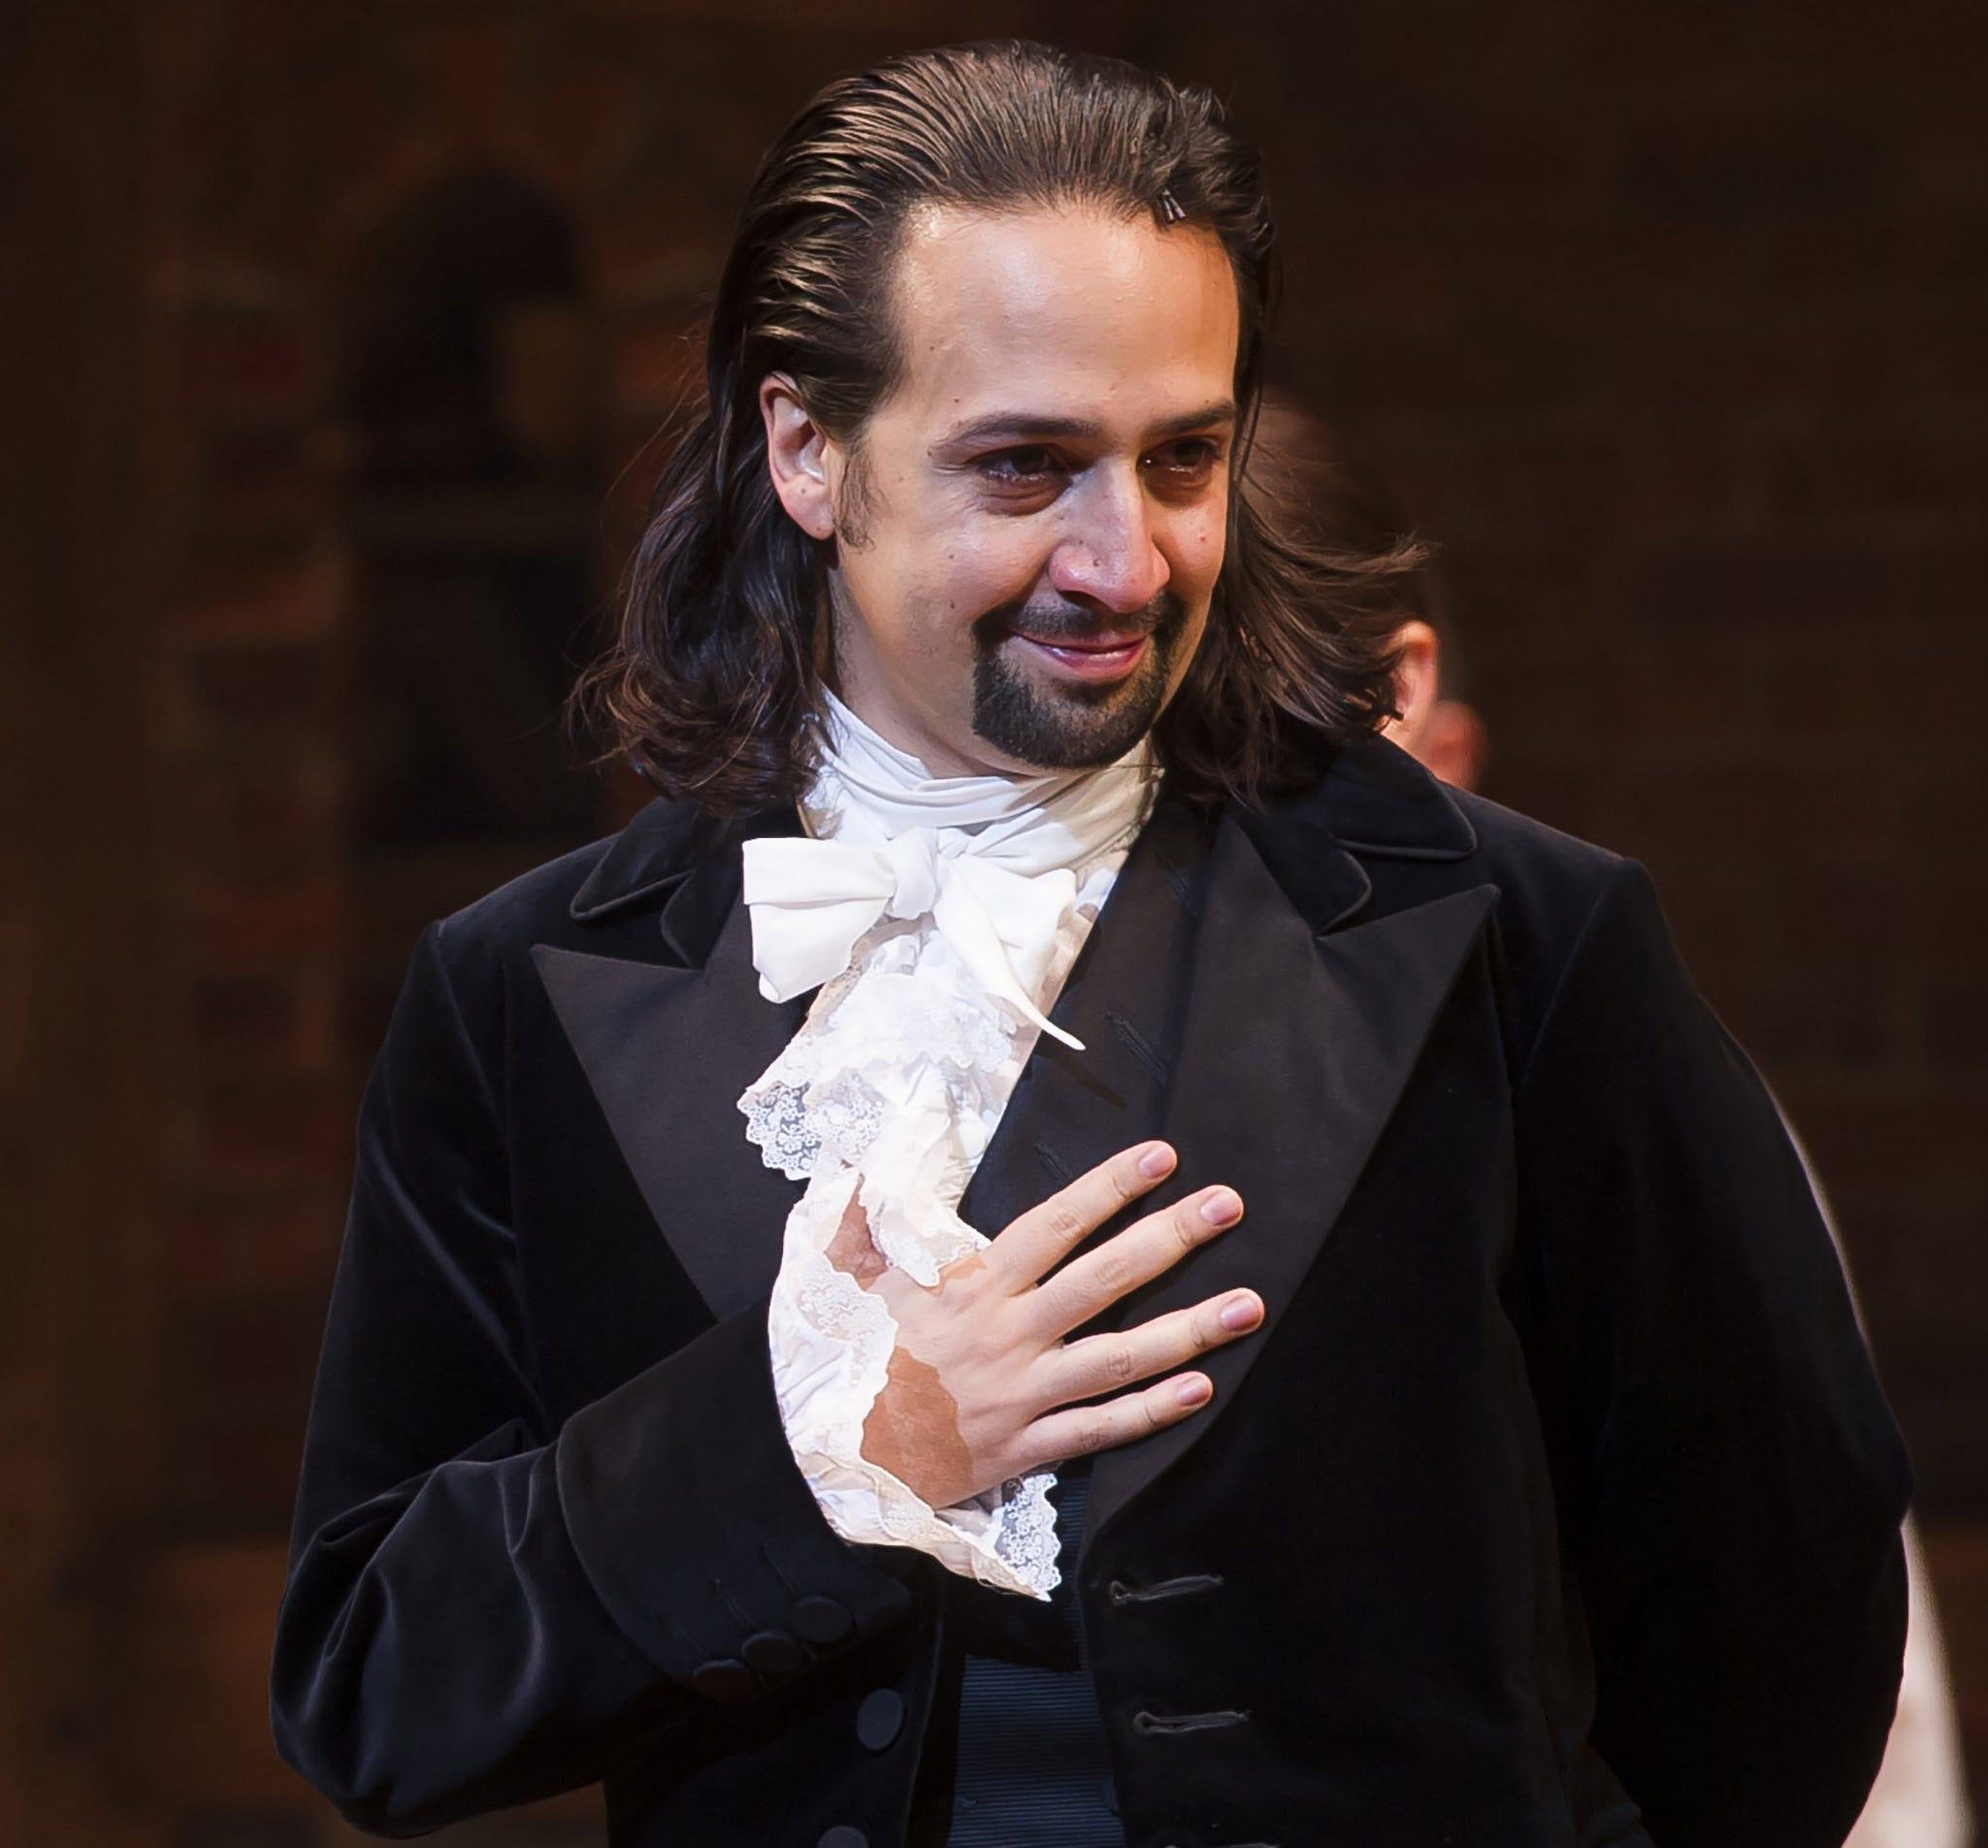 Lin-Manuel Miranda appears at the curtain call following the opening night performance of "Hamilton" at the Richard Rodgers Theatre, in New York. Alexander Hamilton is the face of the ten-dollar bill, and has been considered for removal from the note in favor of someone else. Photo by Charles Sykes/Invision/AP